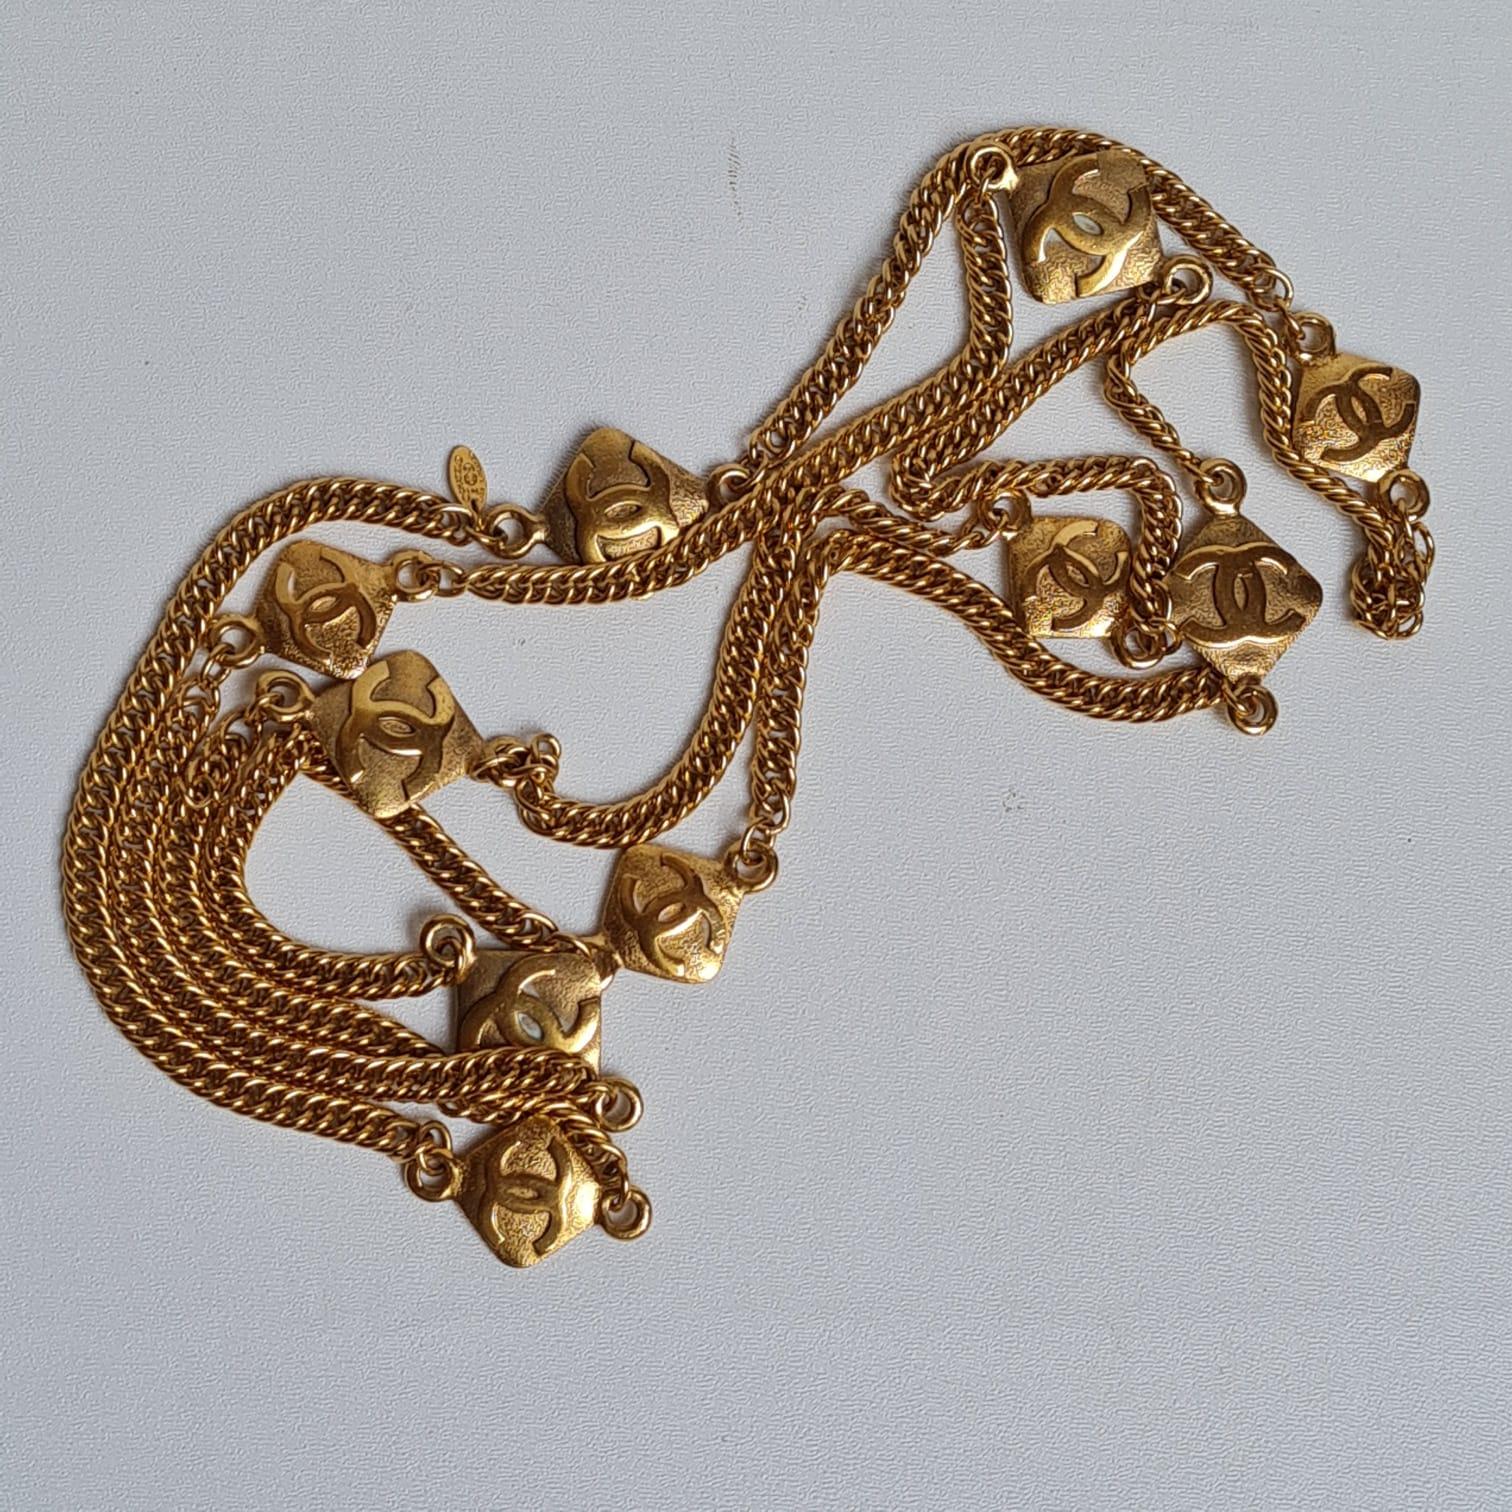 Rare gold layered necklace with diamond shaped CC detailed. Still in beautiful condition, minor white tarnish marks thats still cleanable. Overall still in great vintage condition. Great staple piece. Comes with replacement box.